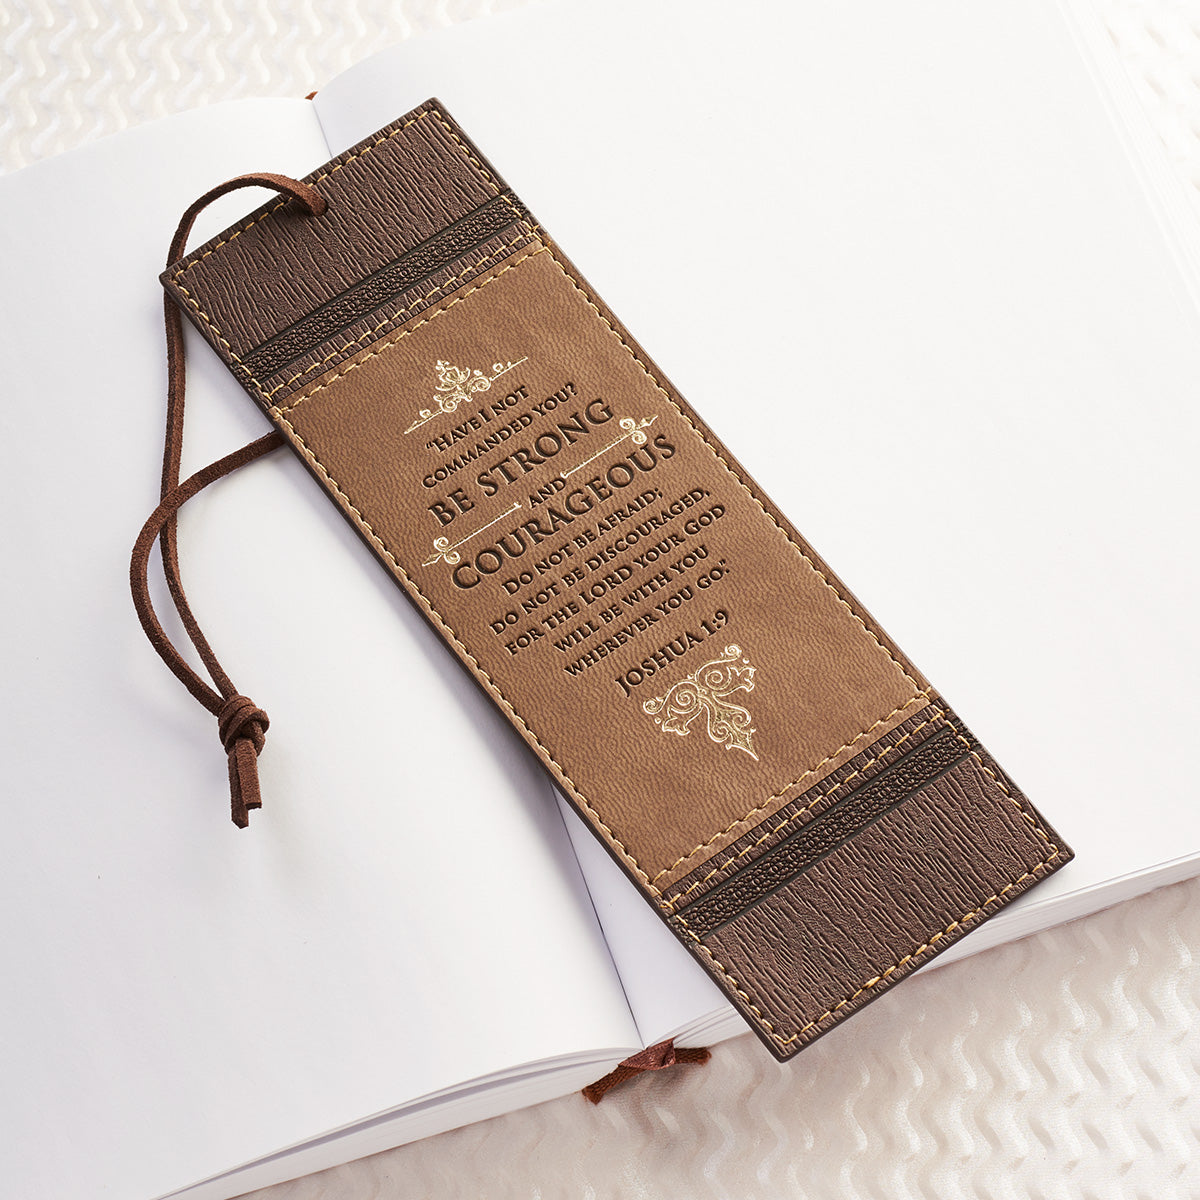 Be Strong and Courageous Brown Two-toned Faux Leather Bookmark - Joshua 1:9 - The Christian Gift Company